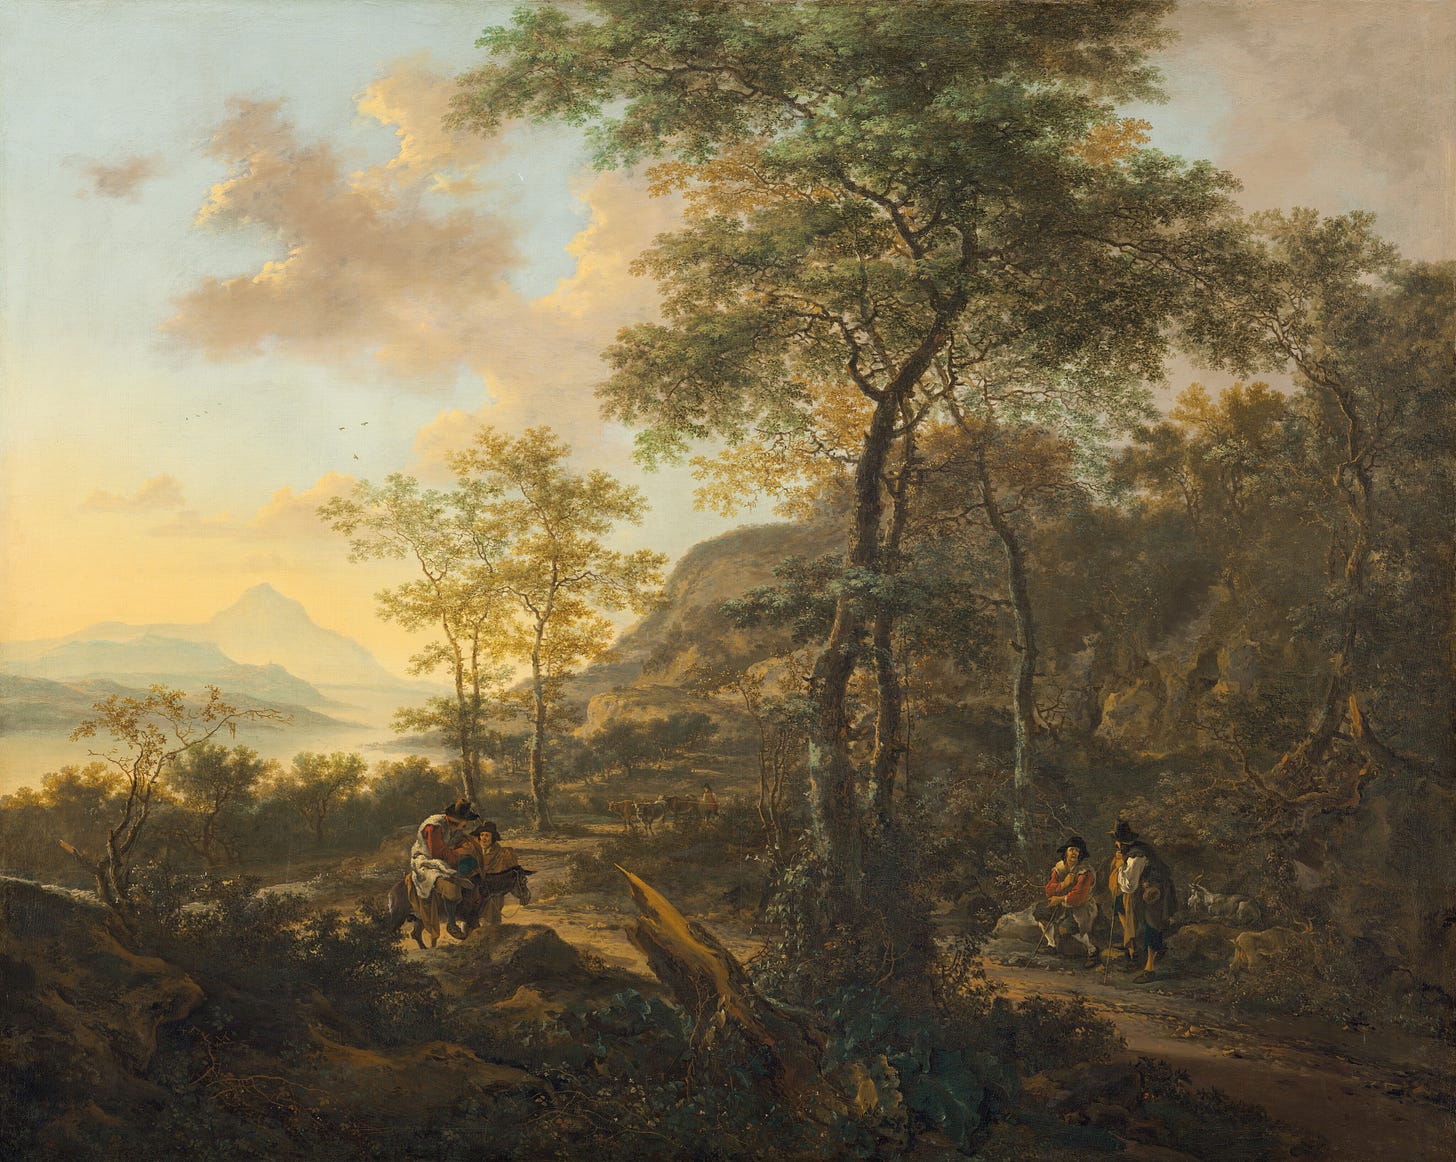 An Italianate Evening Landscape, c. 1650 by Jan Both